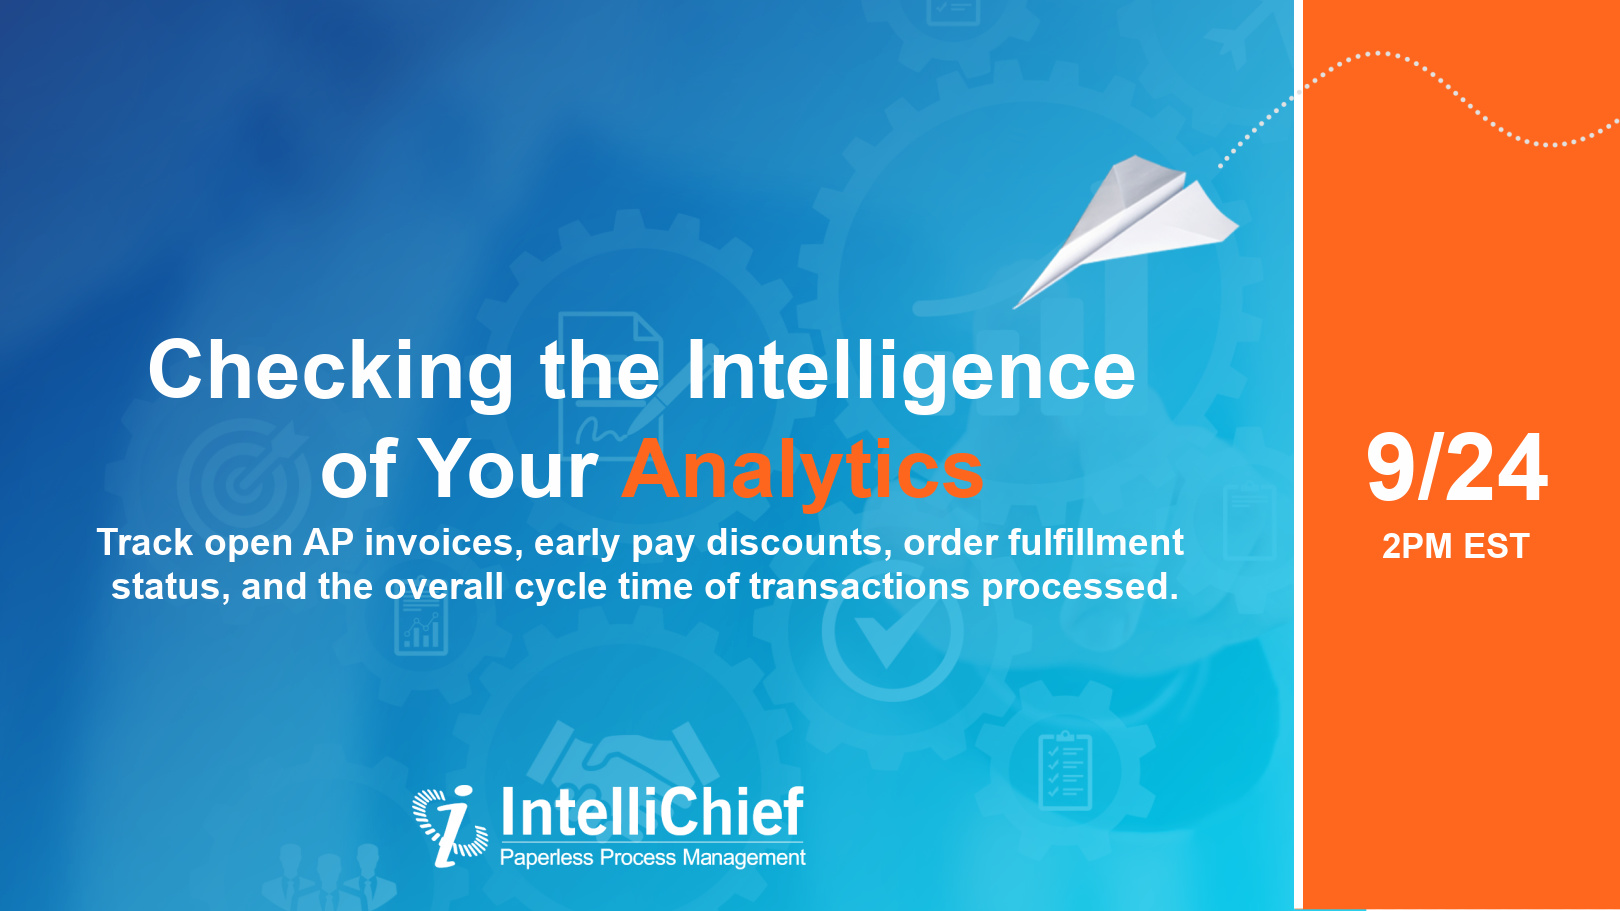 IntelliChief Digital Events Presents: "Checking the Intelligence of Your Analytics"